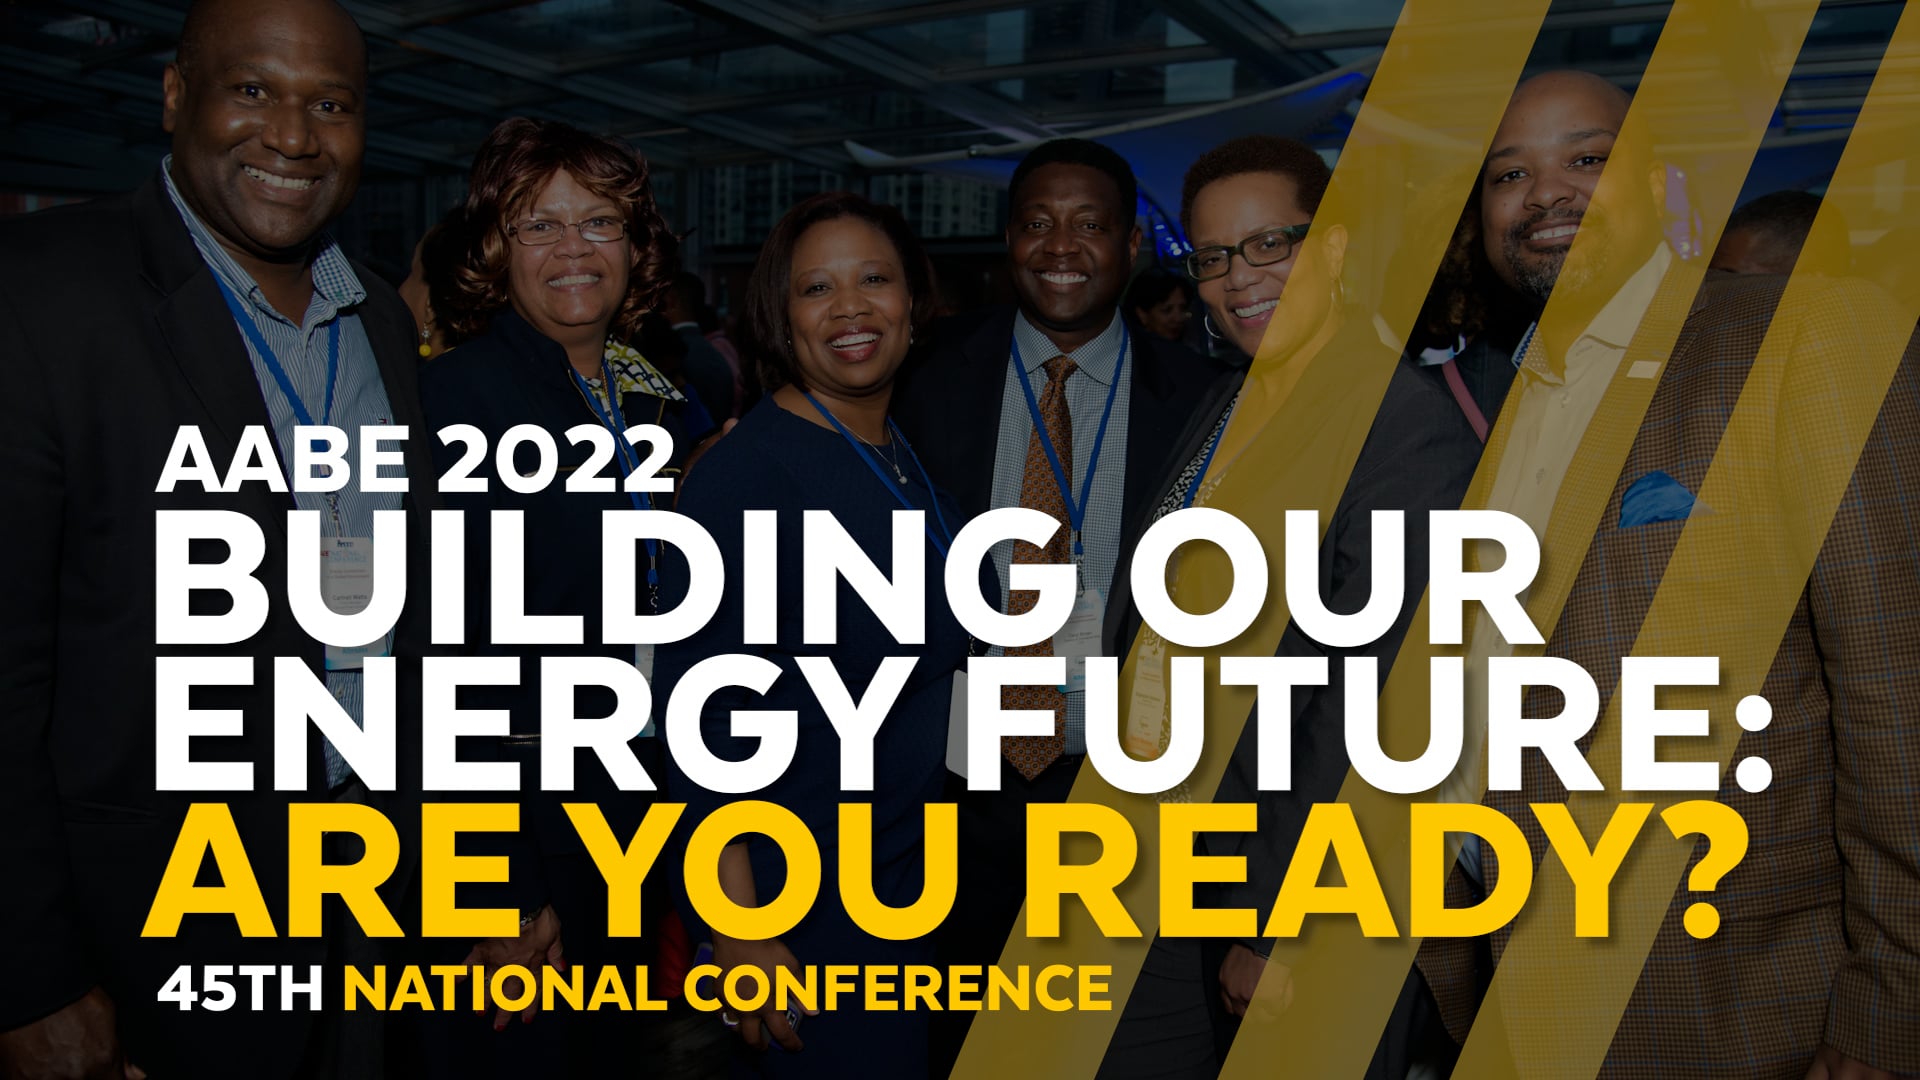 AABE 2022 Conference Promo on Vimeo